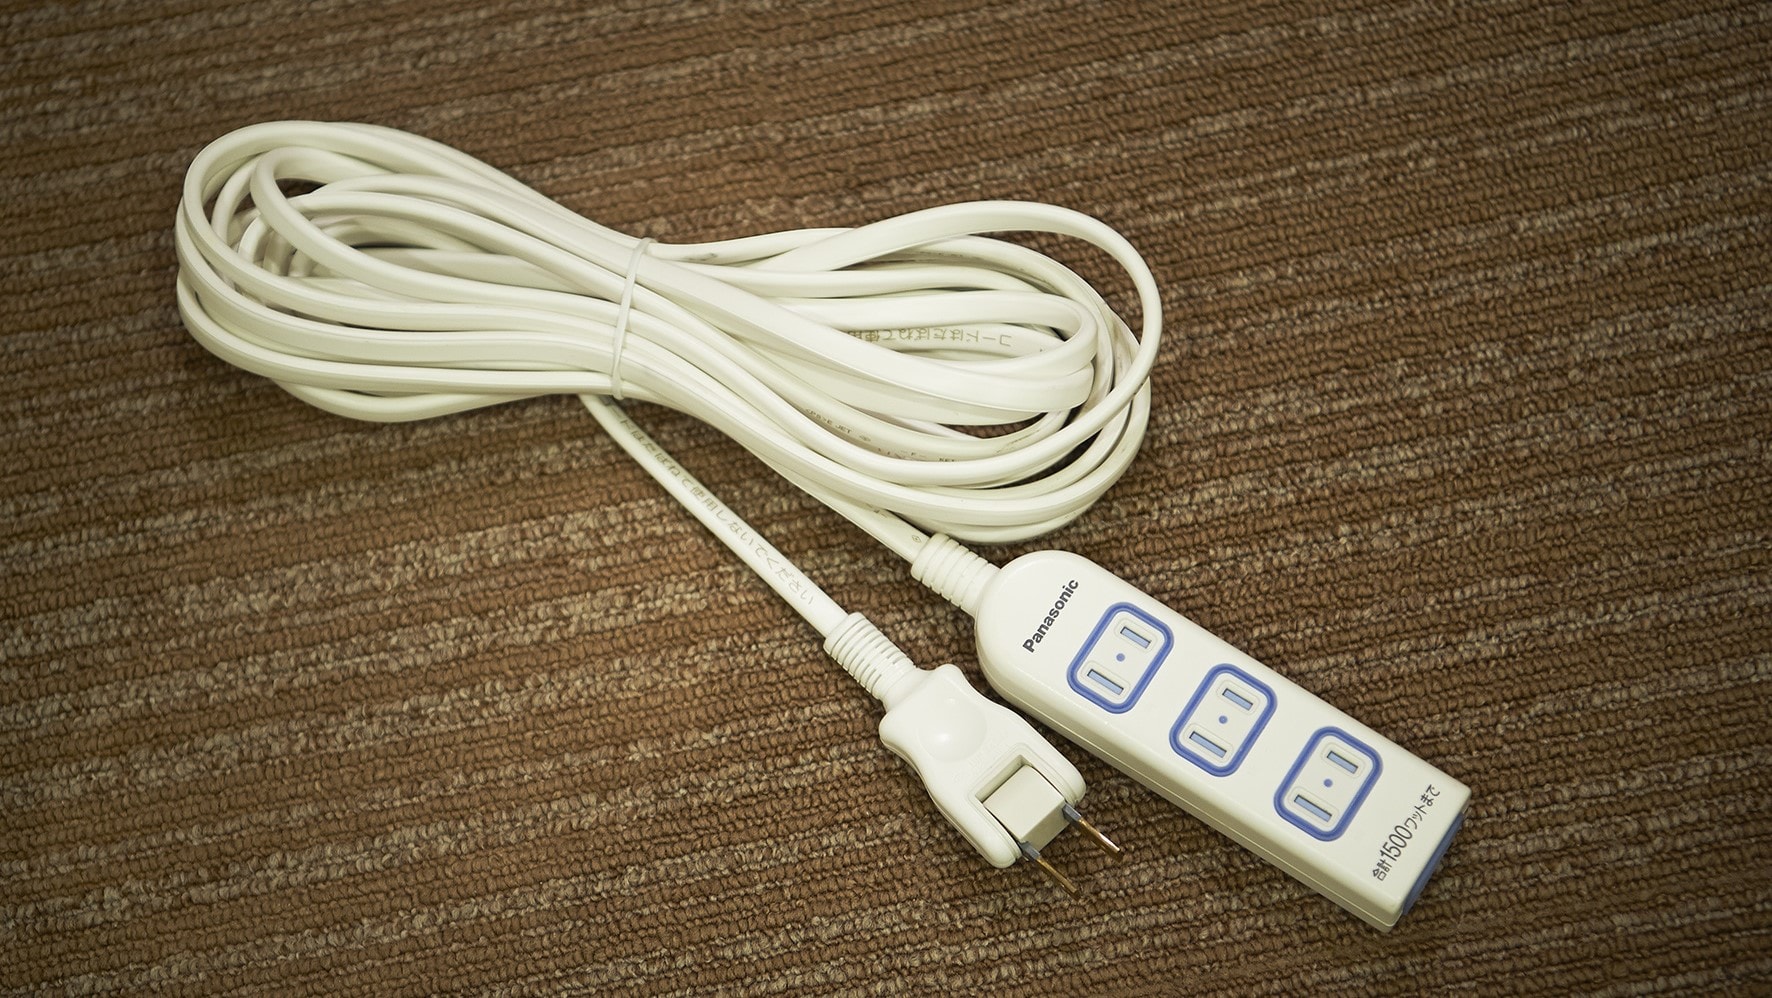 Extension cord (available in all guest rooms from January 2022)